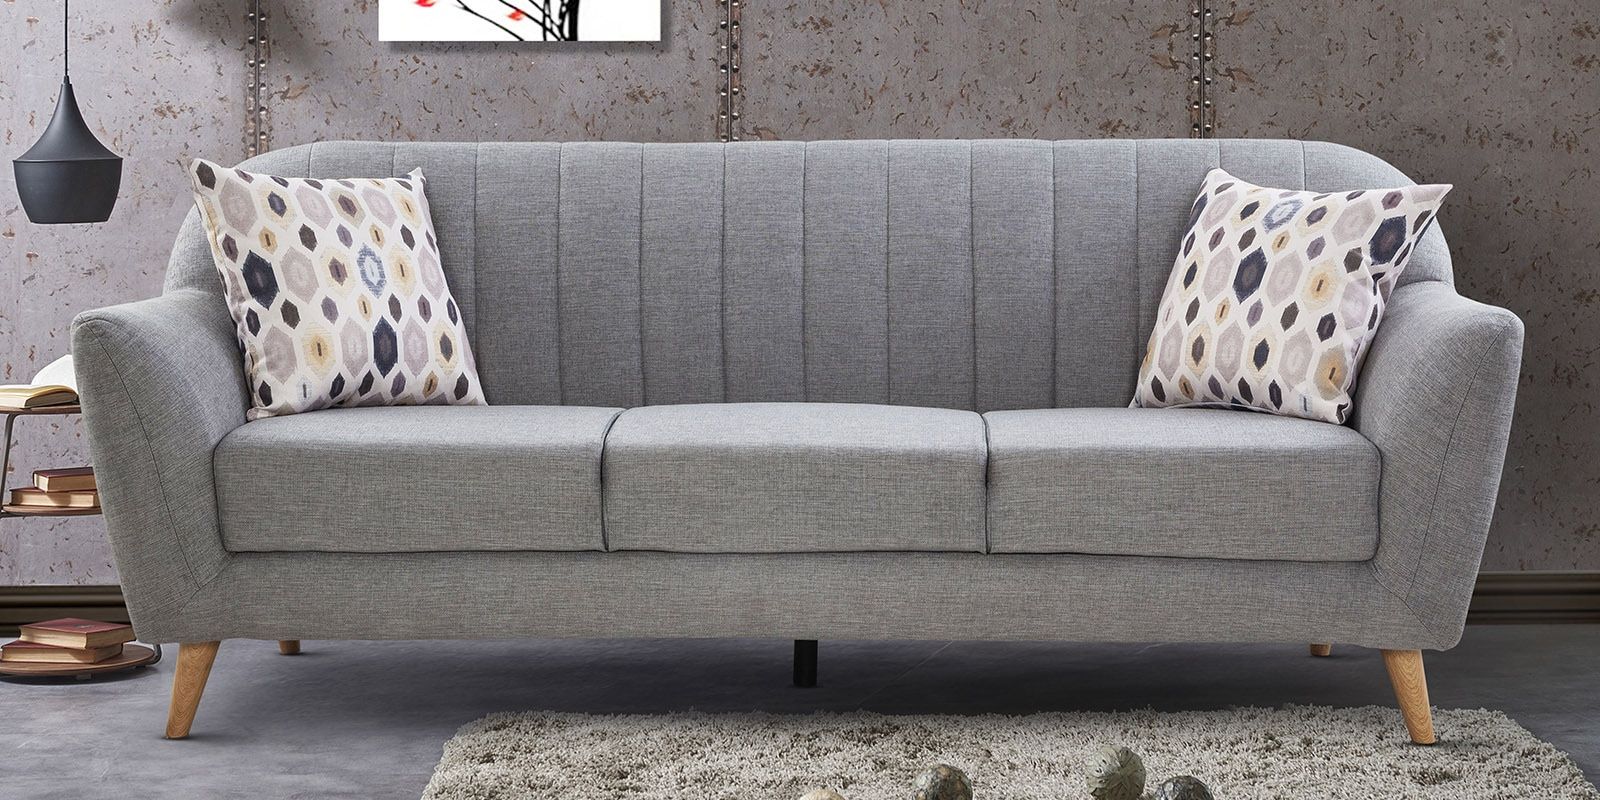 Buy Antalya 3 Seater Sofa In Grey Coloururban Living Intended For Ludovic Contemporary Sofas Light Gray (View 7 of 15)